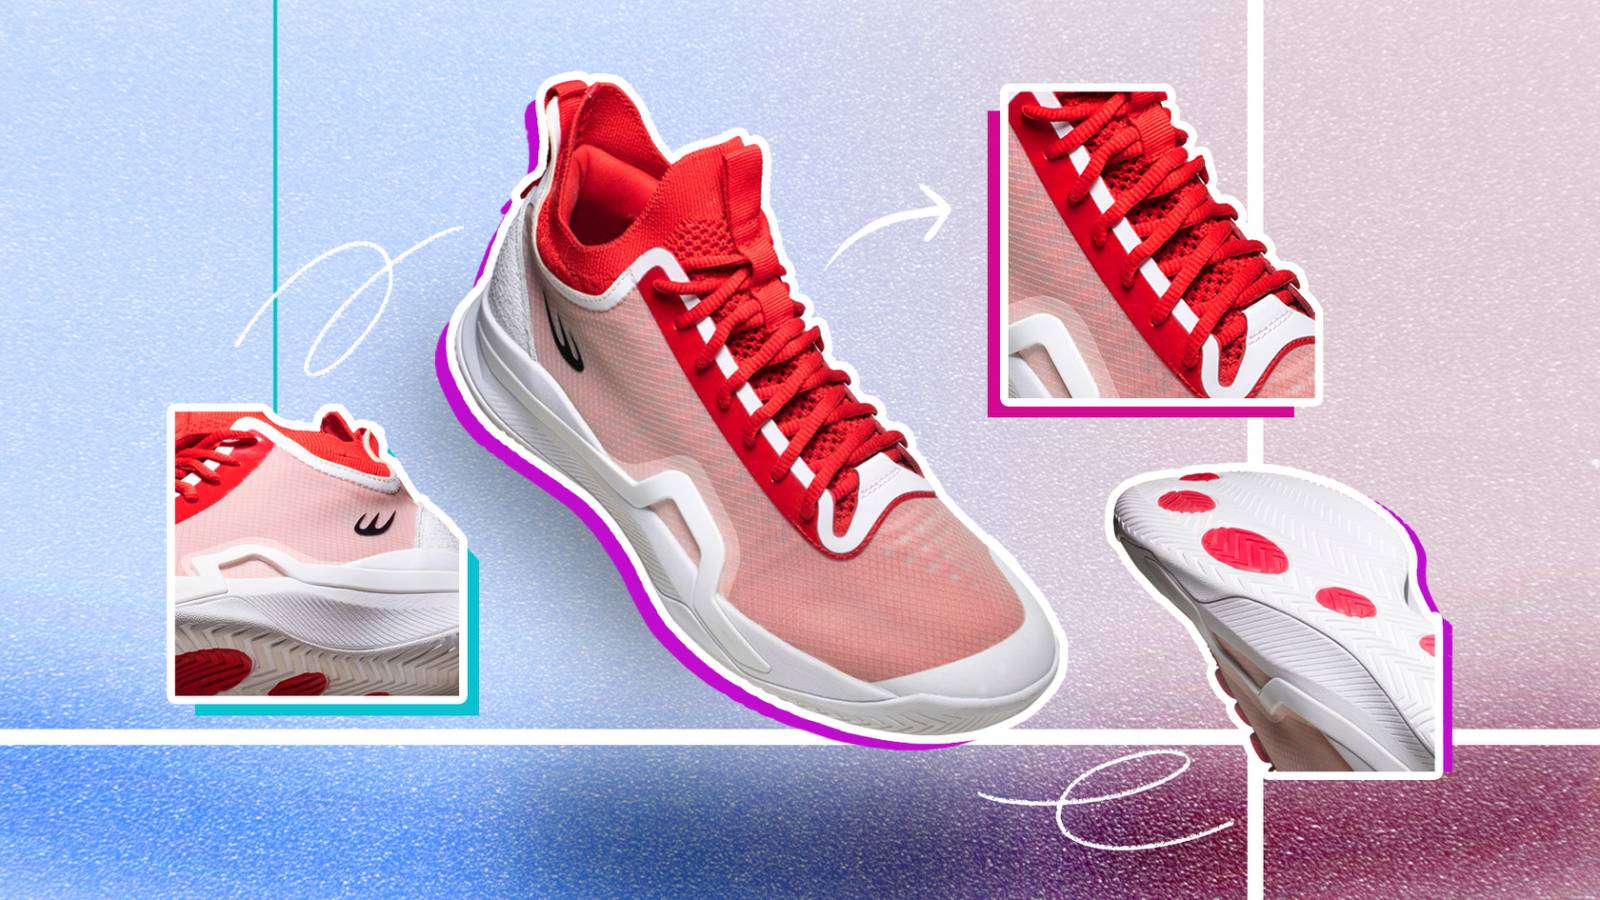 Scottie Thompson x World Balance shoes nearly sold out in less than 24 hours